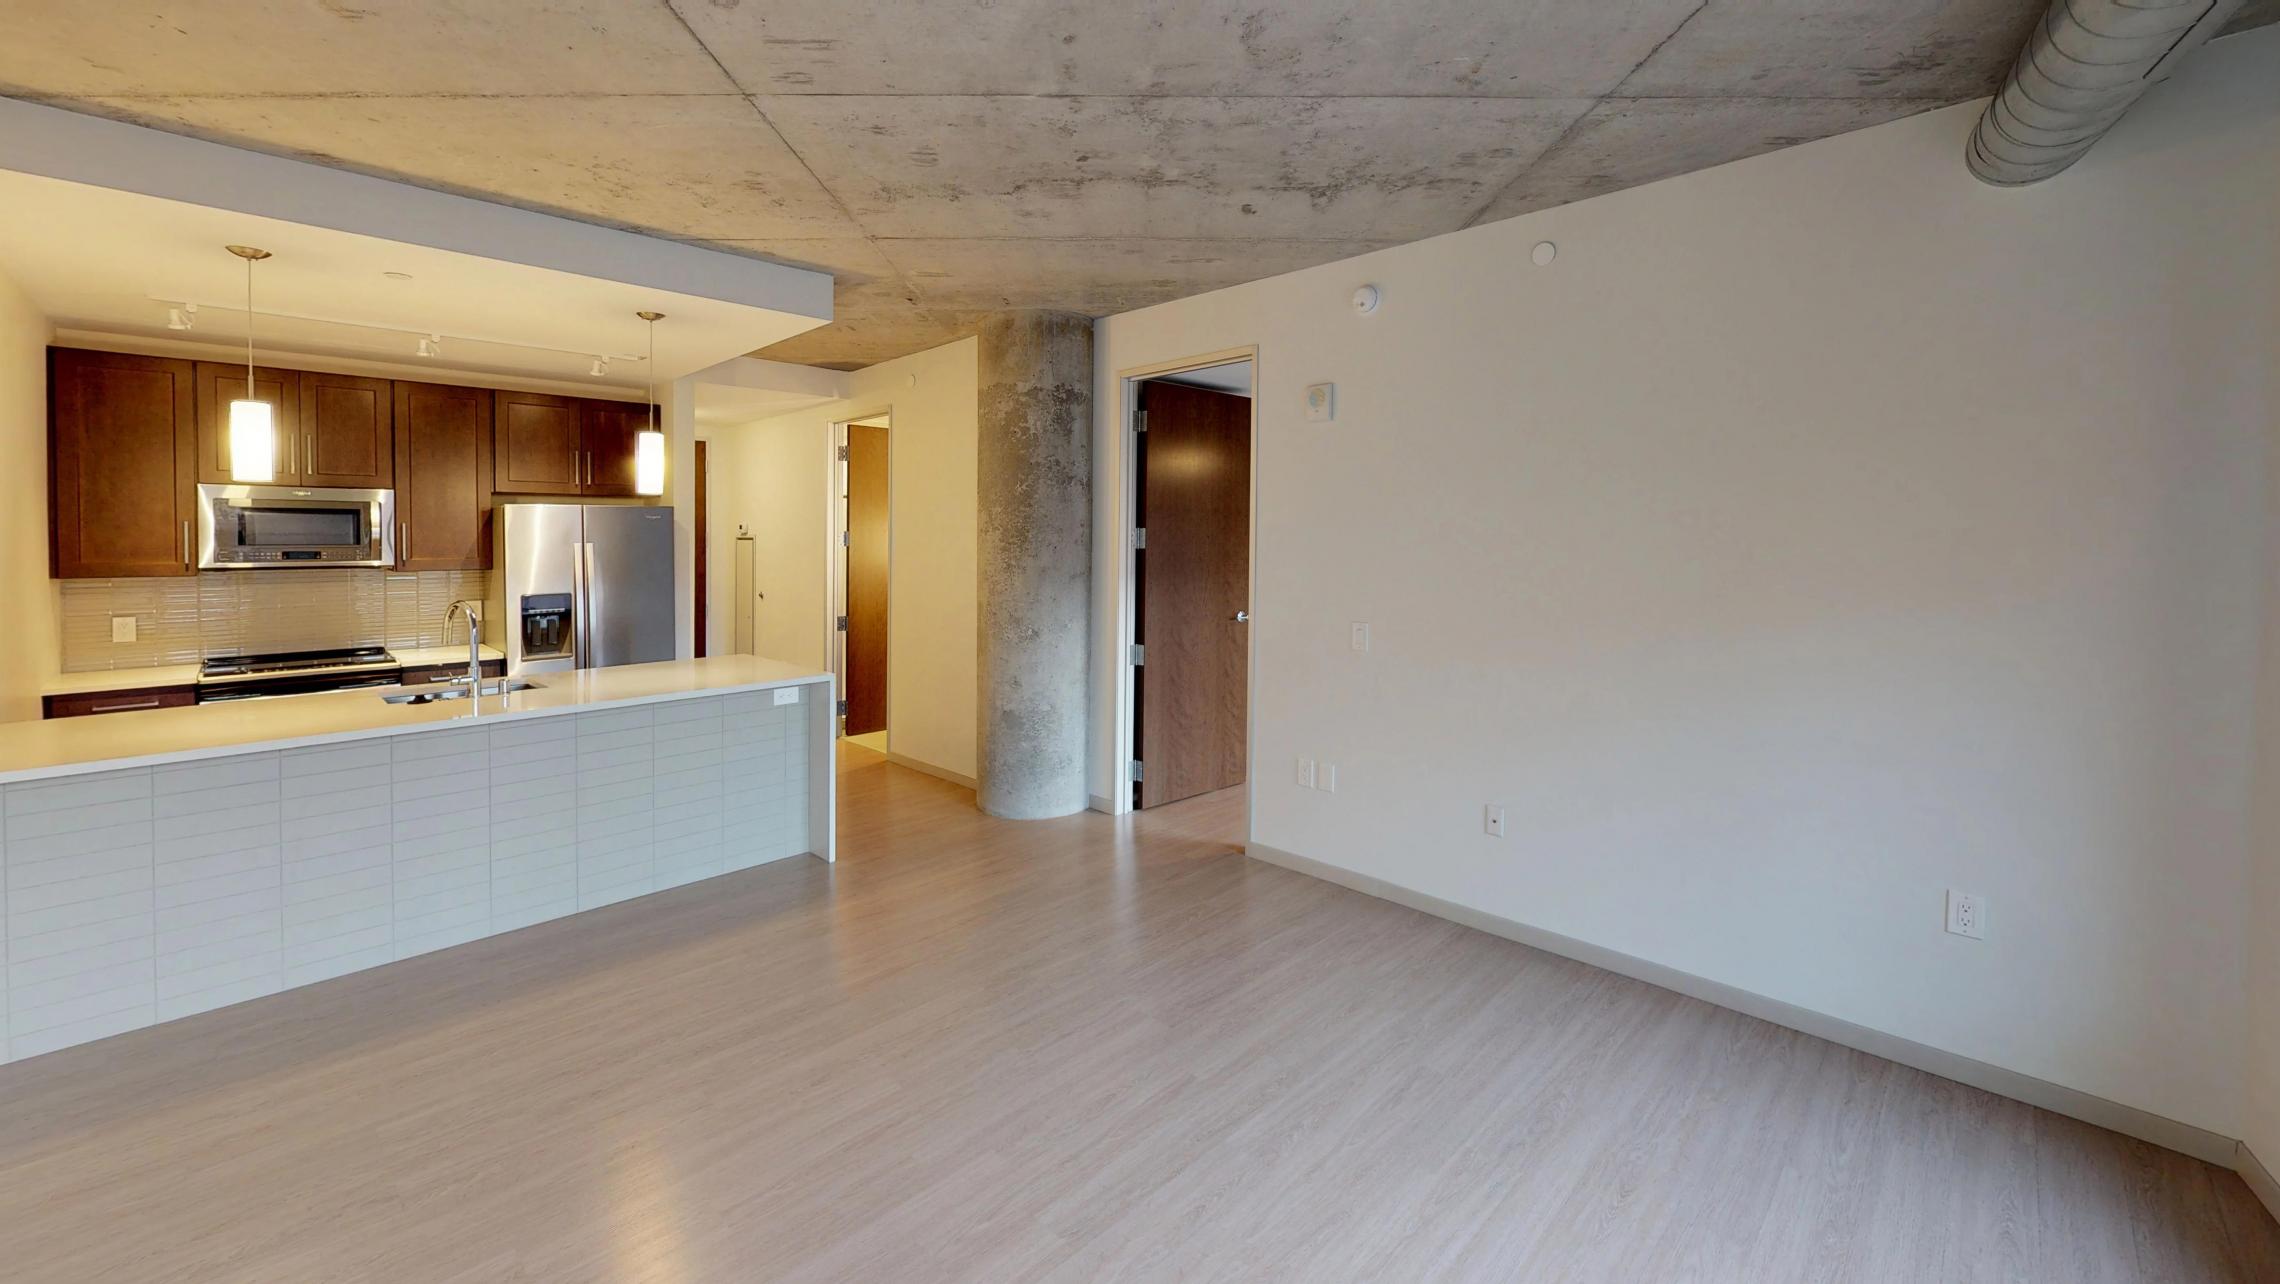 Pressman-Apartment-217-One-Bedroom-Luxury-Downtown-Upscale-Modern-Downtown-Madison-Capitol-Square-Kitchen-Island